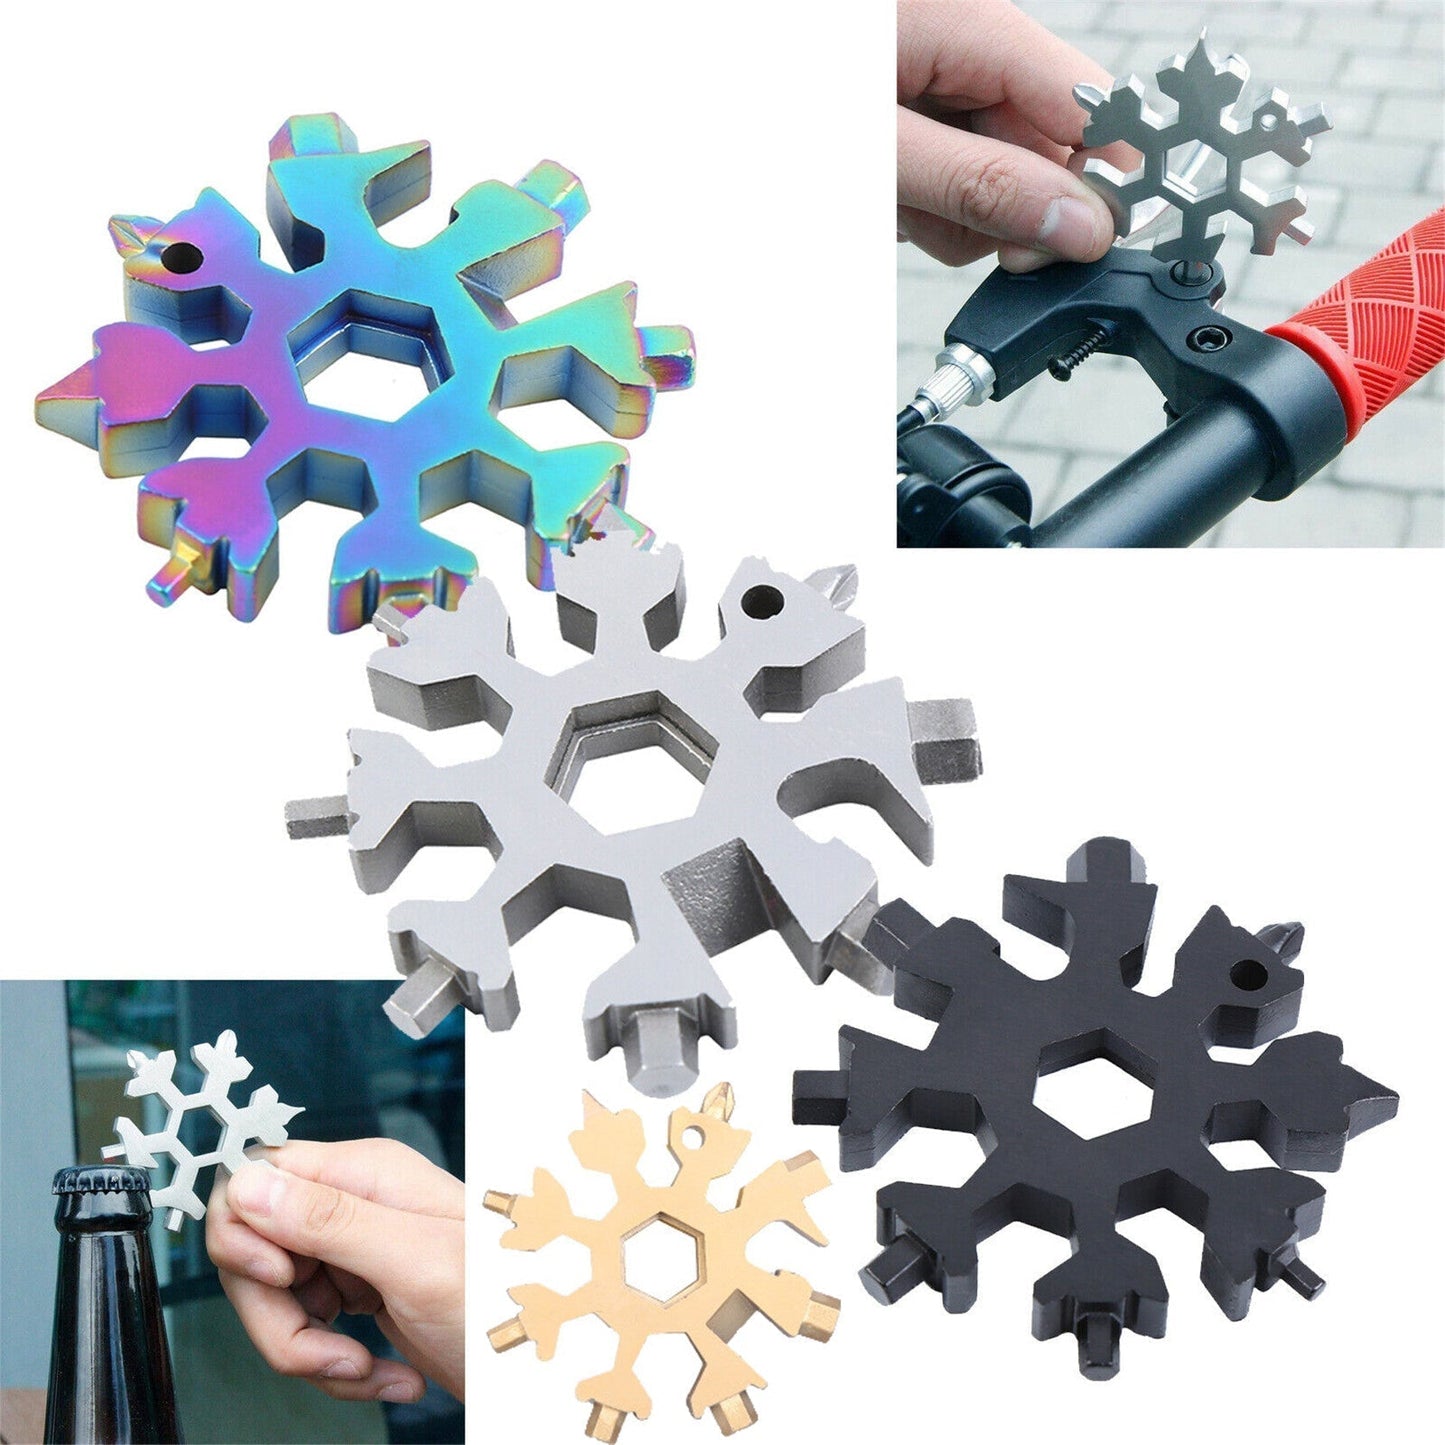 findmall  18-in-1 Snowflake Multi-Tool Snowflake Keychain Tool Snowflake Screwdriver Tactical Tool for Military Enthusiasts Outdoor EDC Tools Christmas Gift (Rainbow Color) FINDMALLPARTS